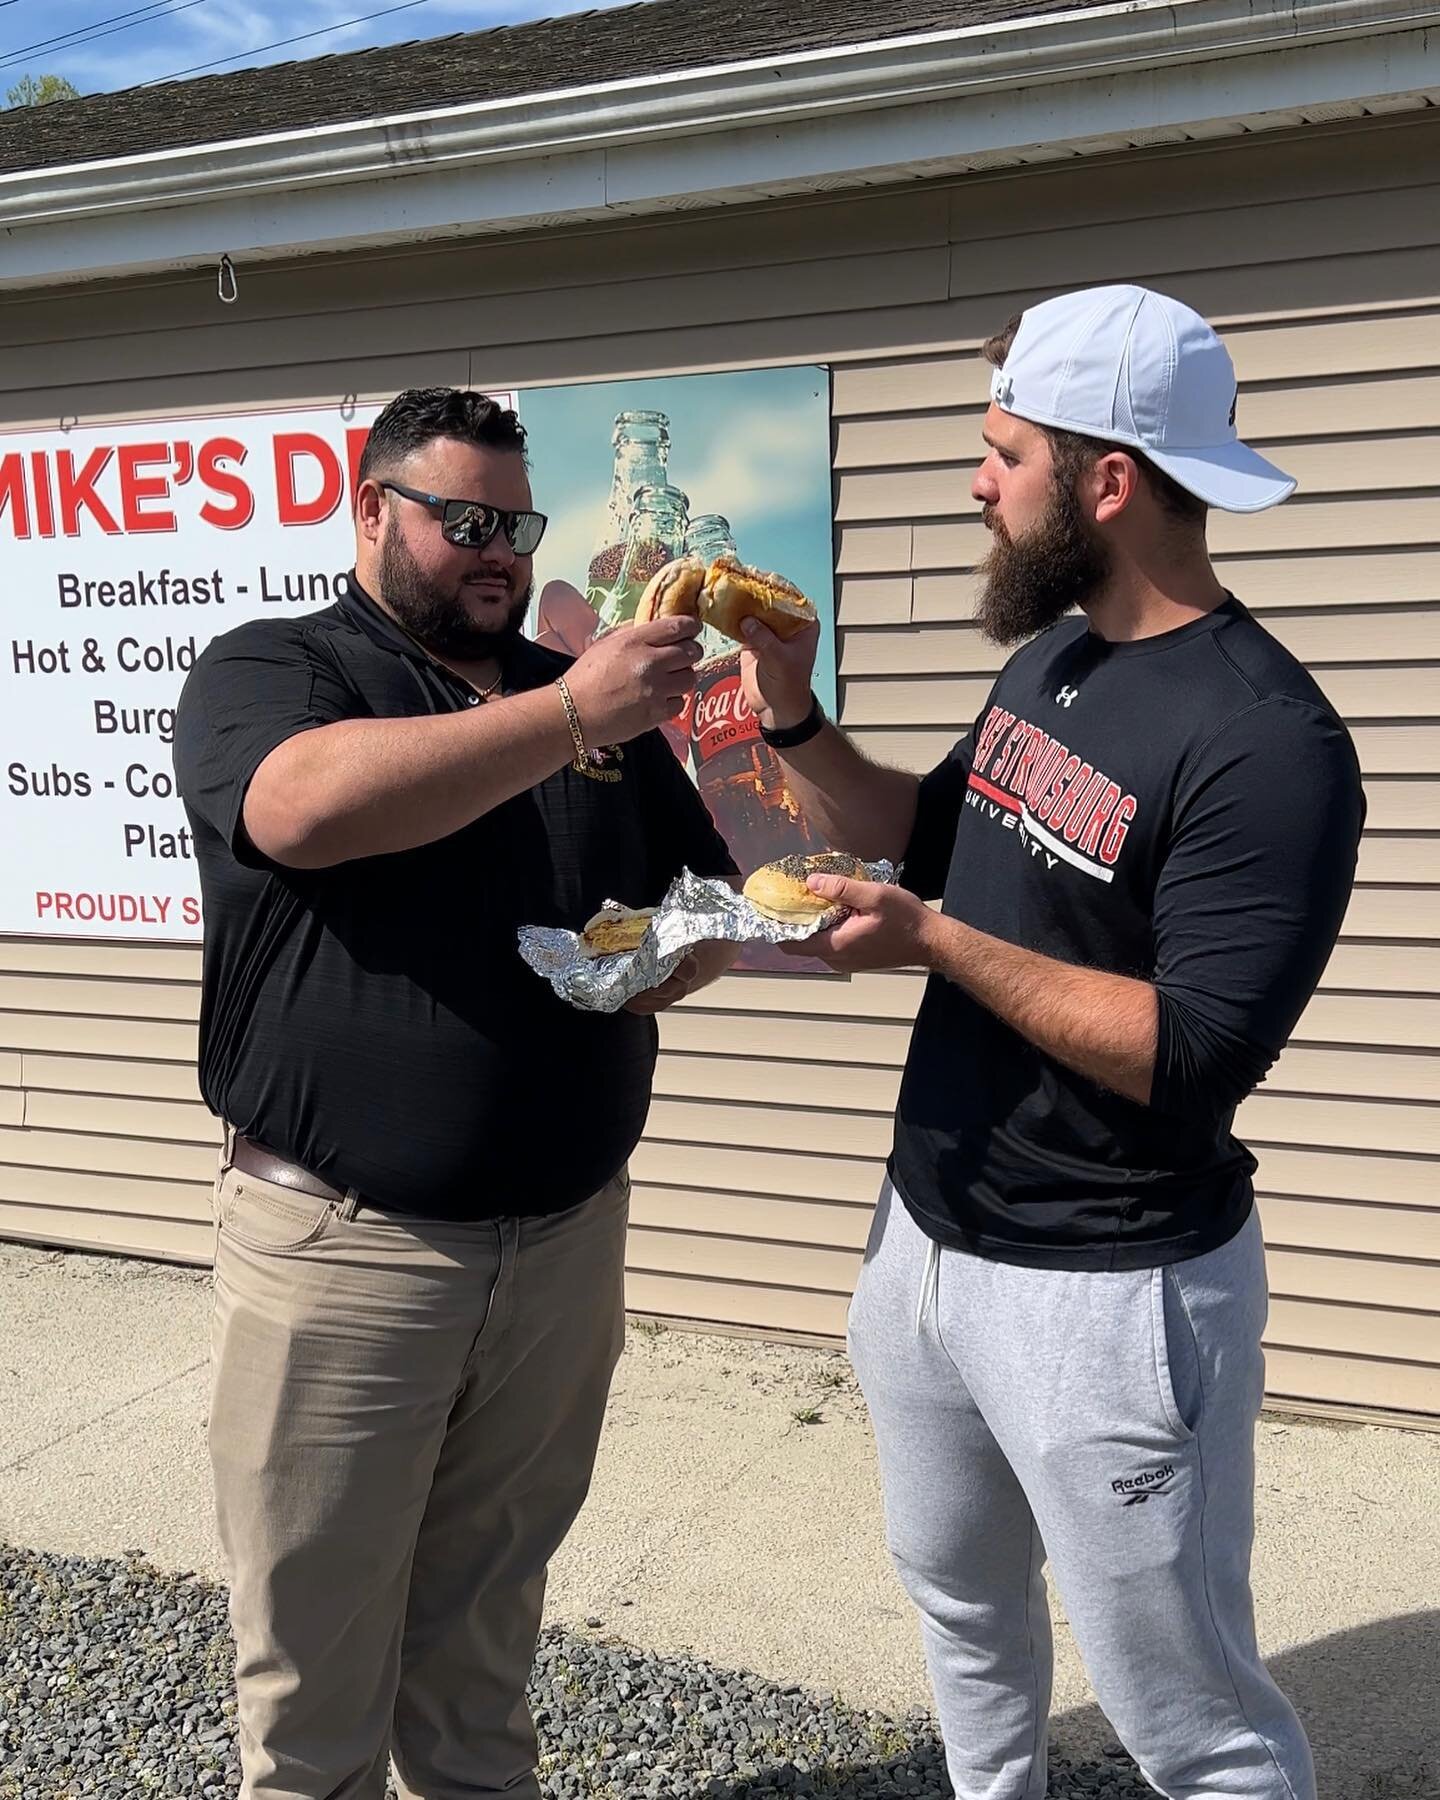 Talkin&rsquo; Taylor Ham with @teamtaylornj and Mike w/@espositoelectric - check out their review of Mike&rsquo;s Deli on 5/23 for #nationaltaylorhamday ( not #porkrollday ) #lakeshorecreativellc